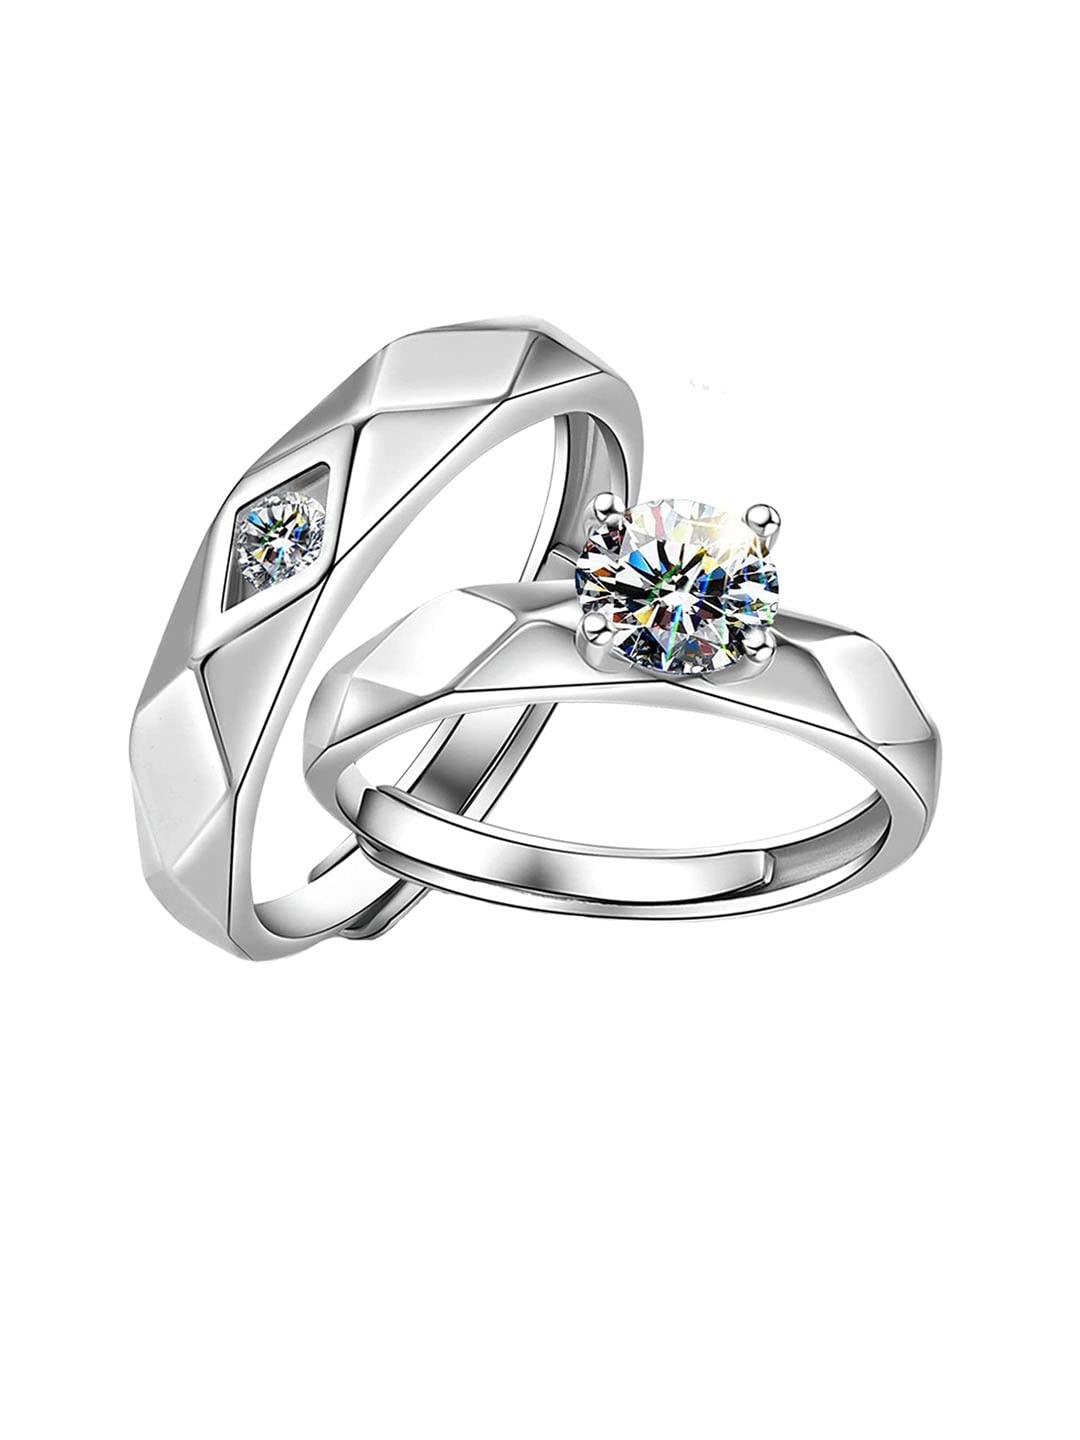 Nilu's Collection 925 Sterling Silver Imperial Romantic Couple Ring| W